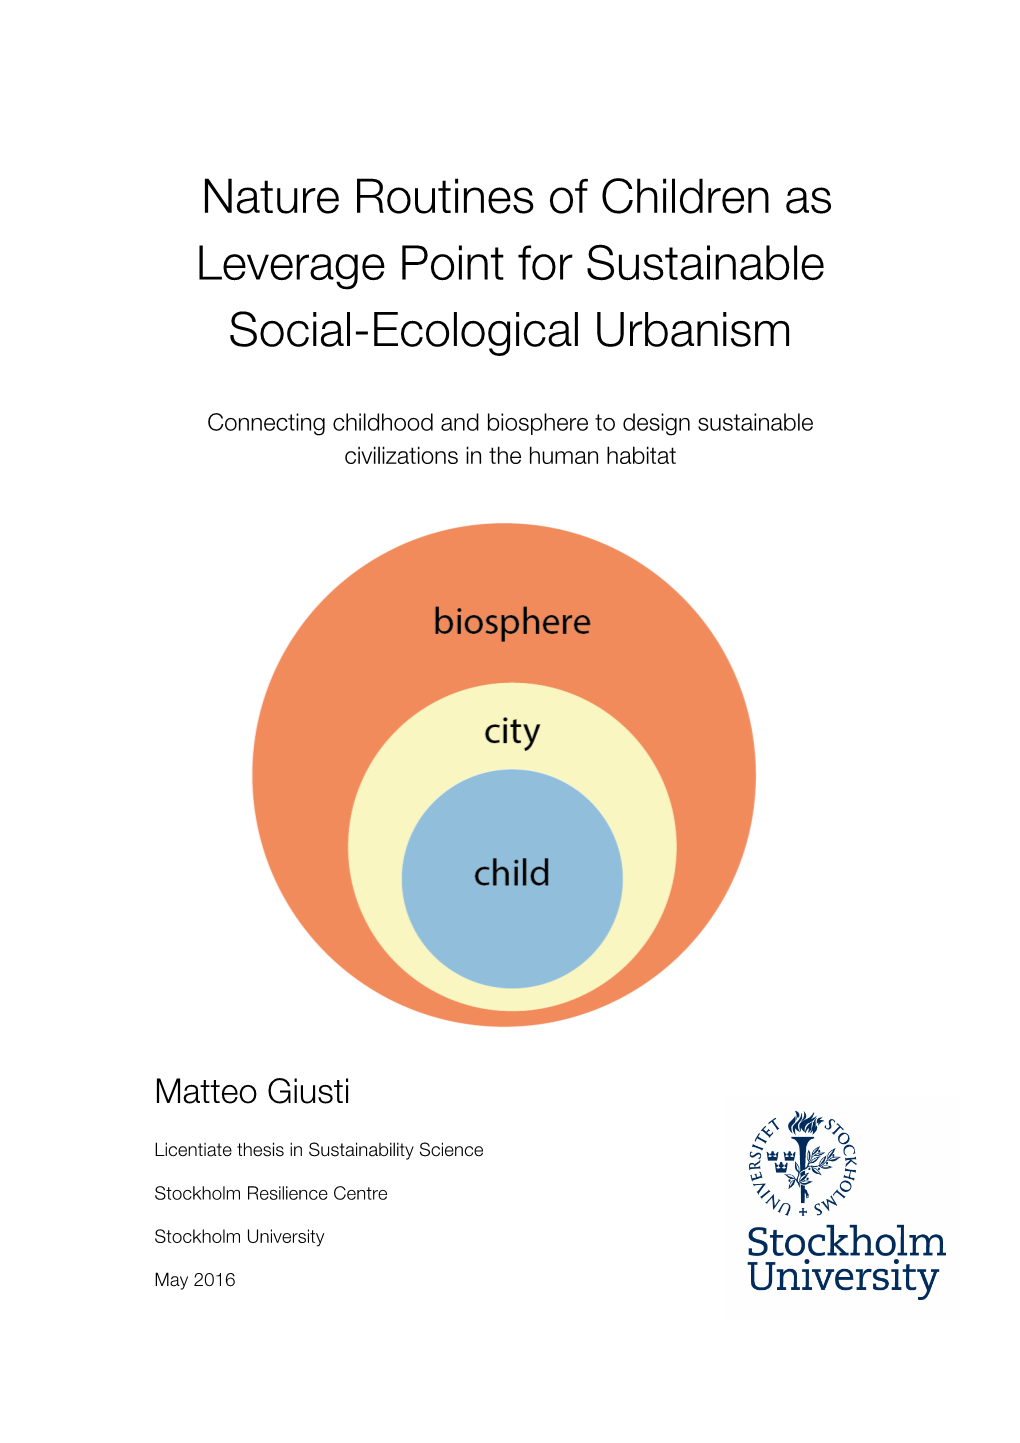 Nature Routines of Children As Leverage Point for Sustainable Social-Ecological Urbanism